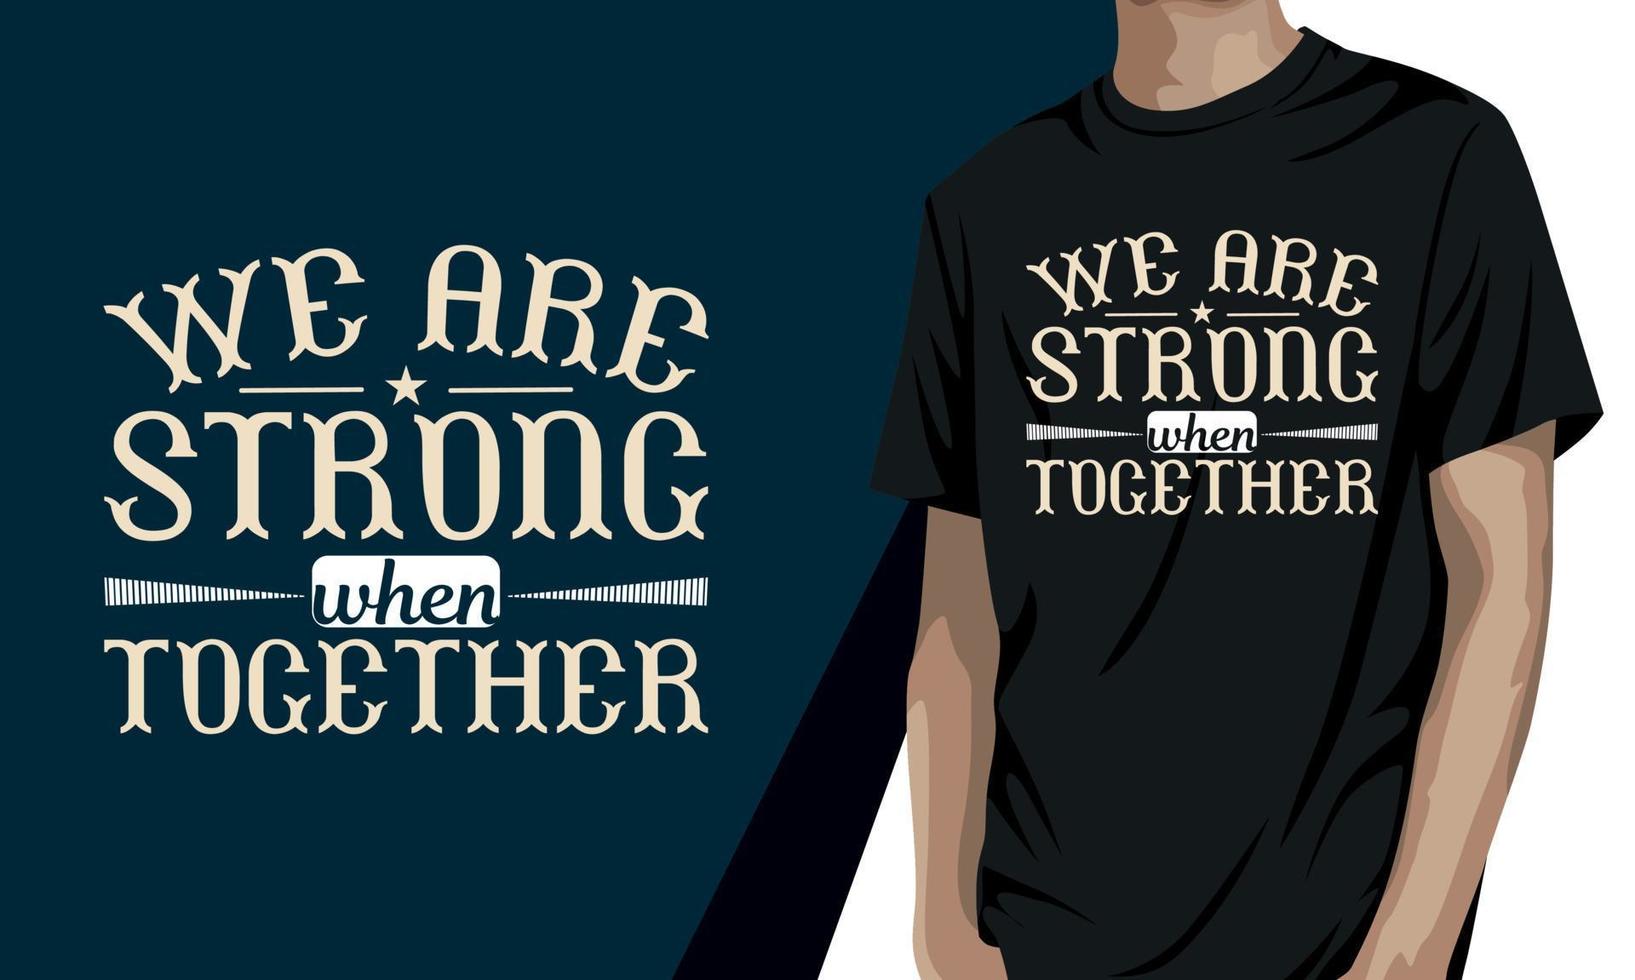 We are strong when together, motivational t-shirt design vector